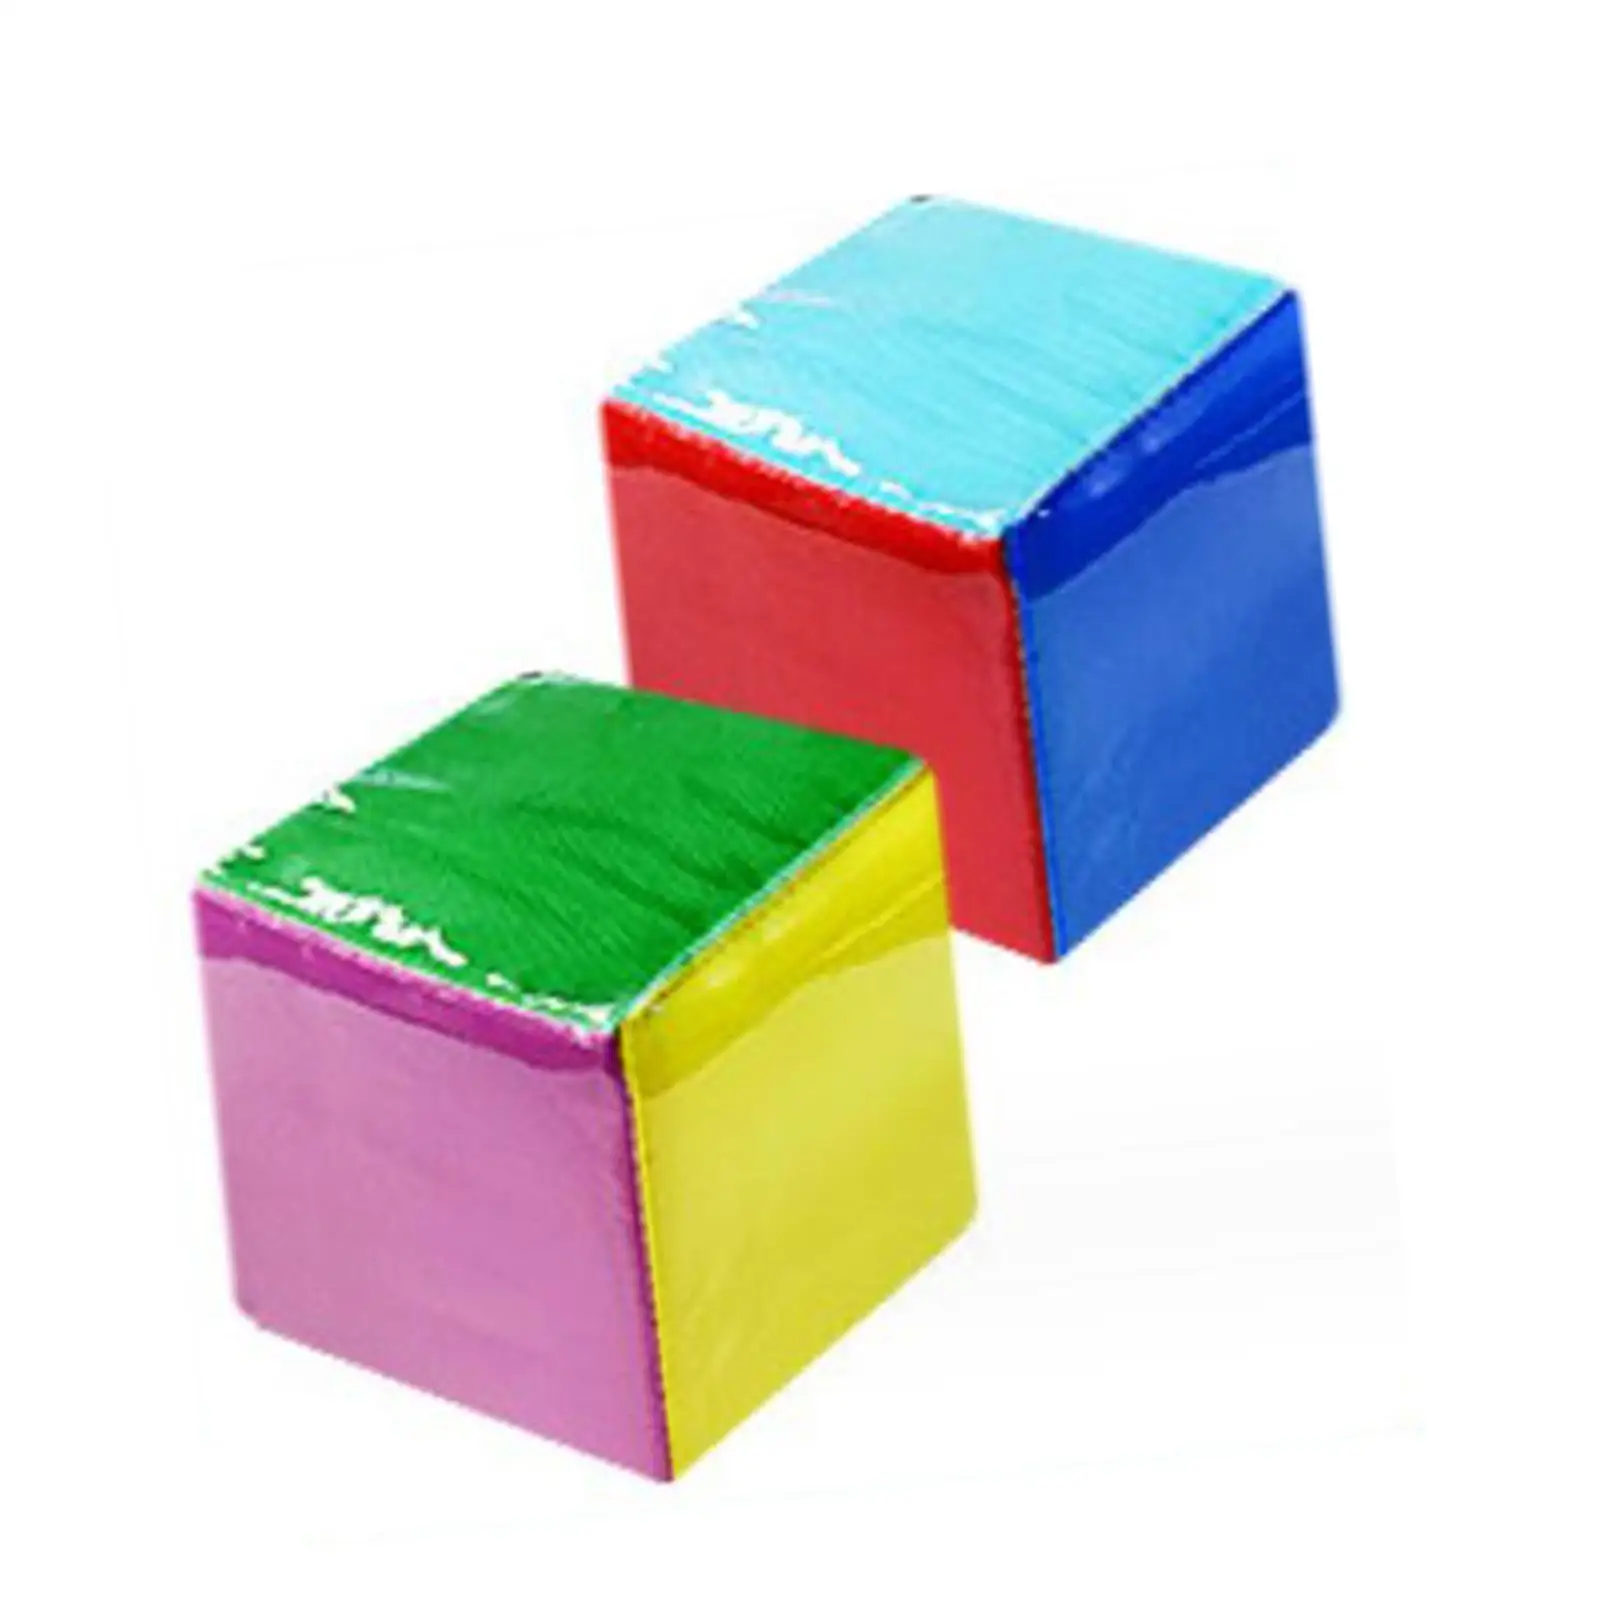 Soft Pocket Cubes 3.94 inch Large Dice Plush Cube with Clear Pocket for Preschool Activity Blocks Toys Small Group Whole Class